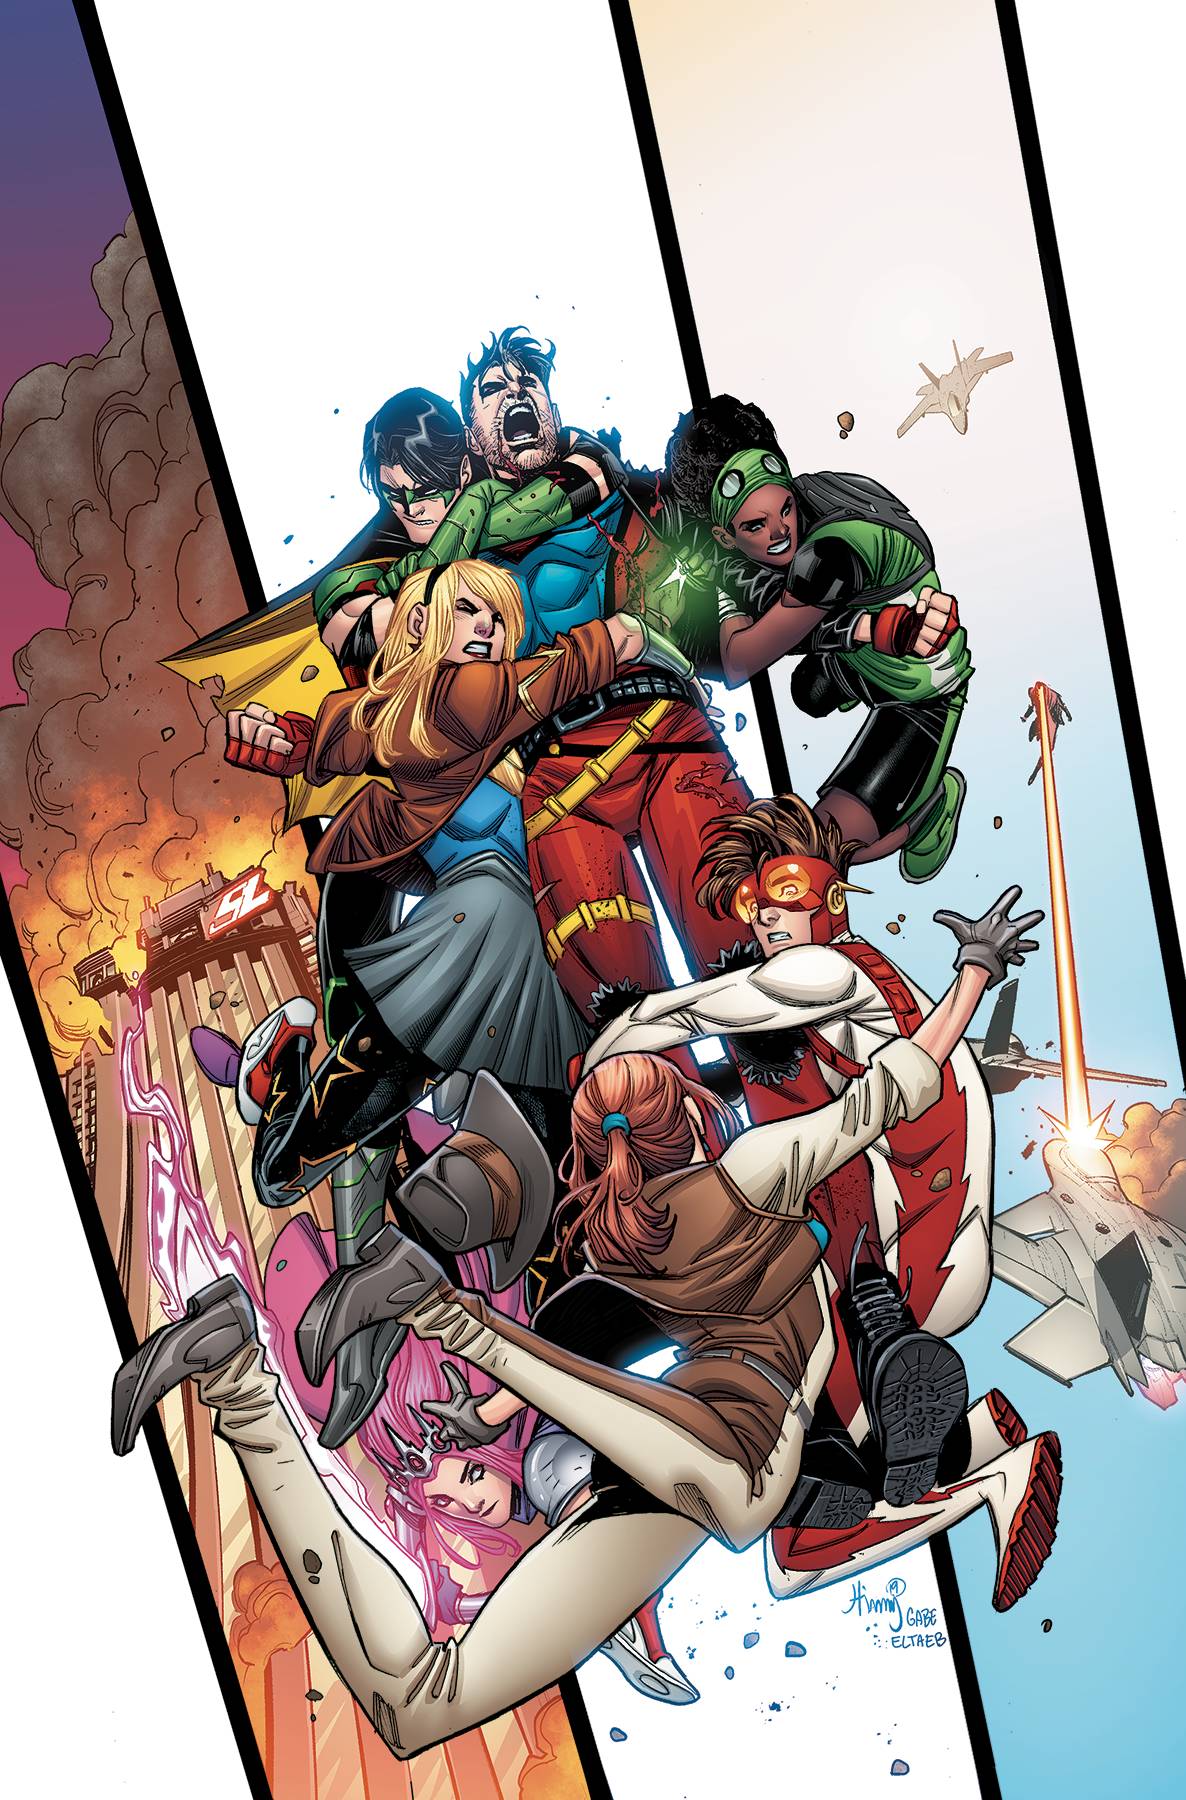 09/04/2019 YOUNG JUSTICE #8